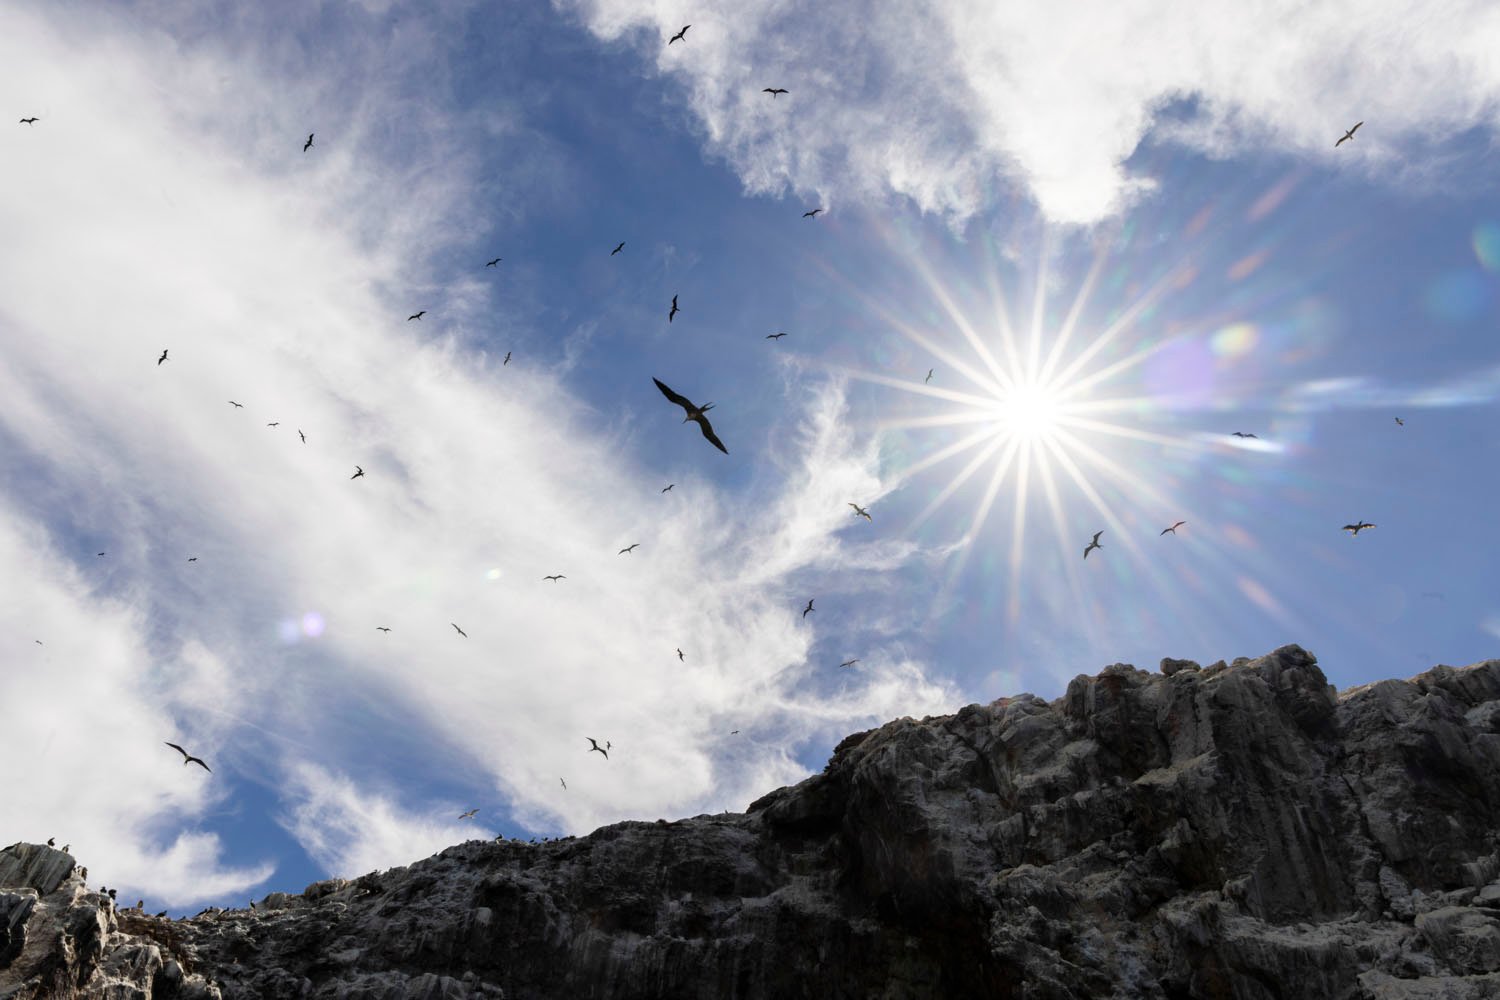 Birds flying over rocky cliffs under a bright sun with dazzling rays and a partly cloudy sky.